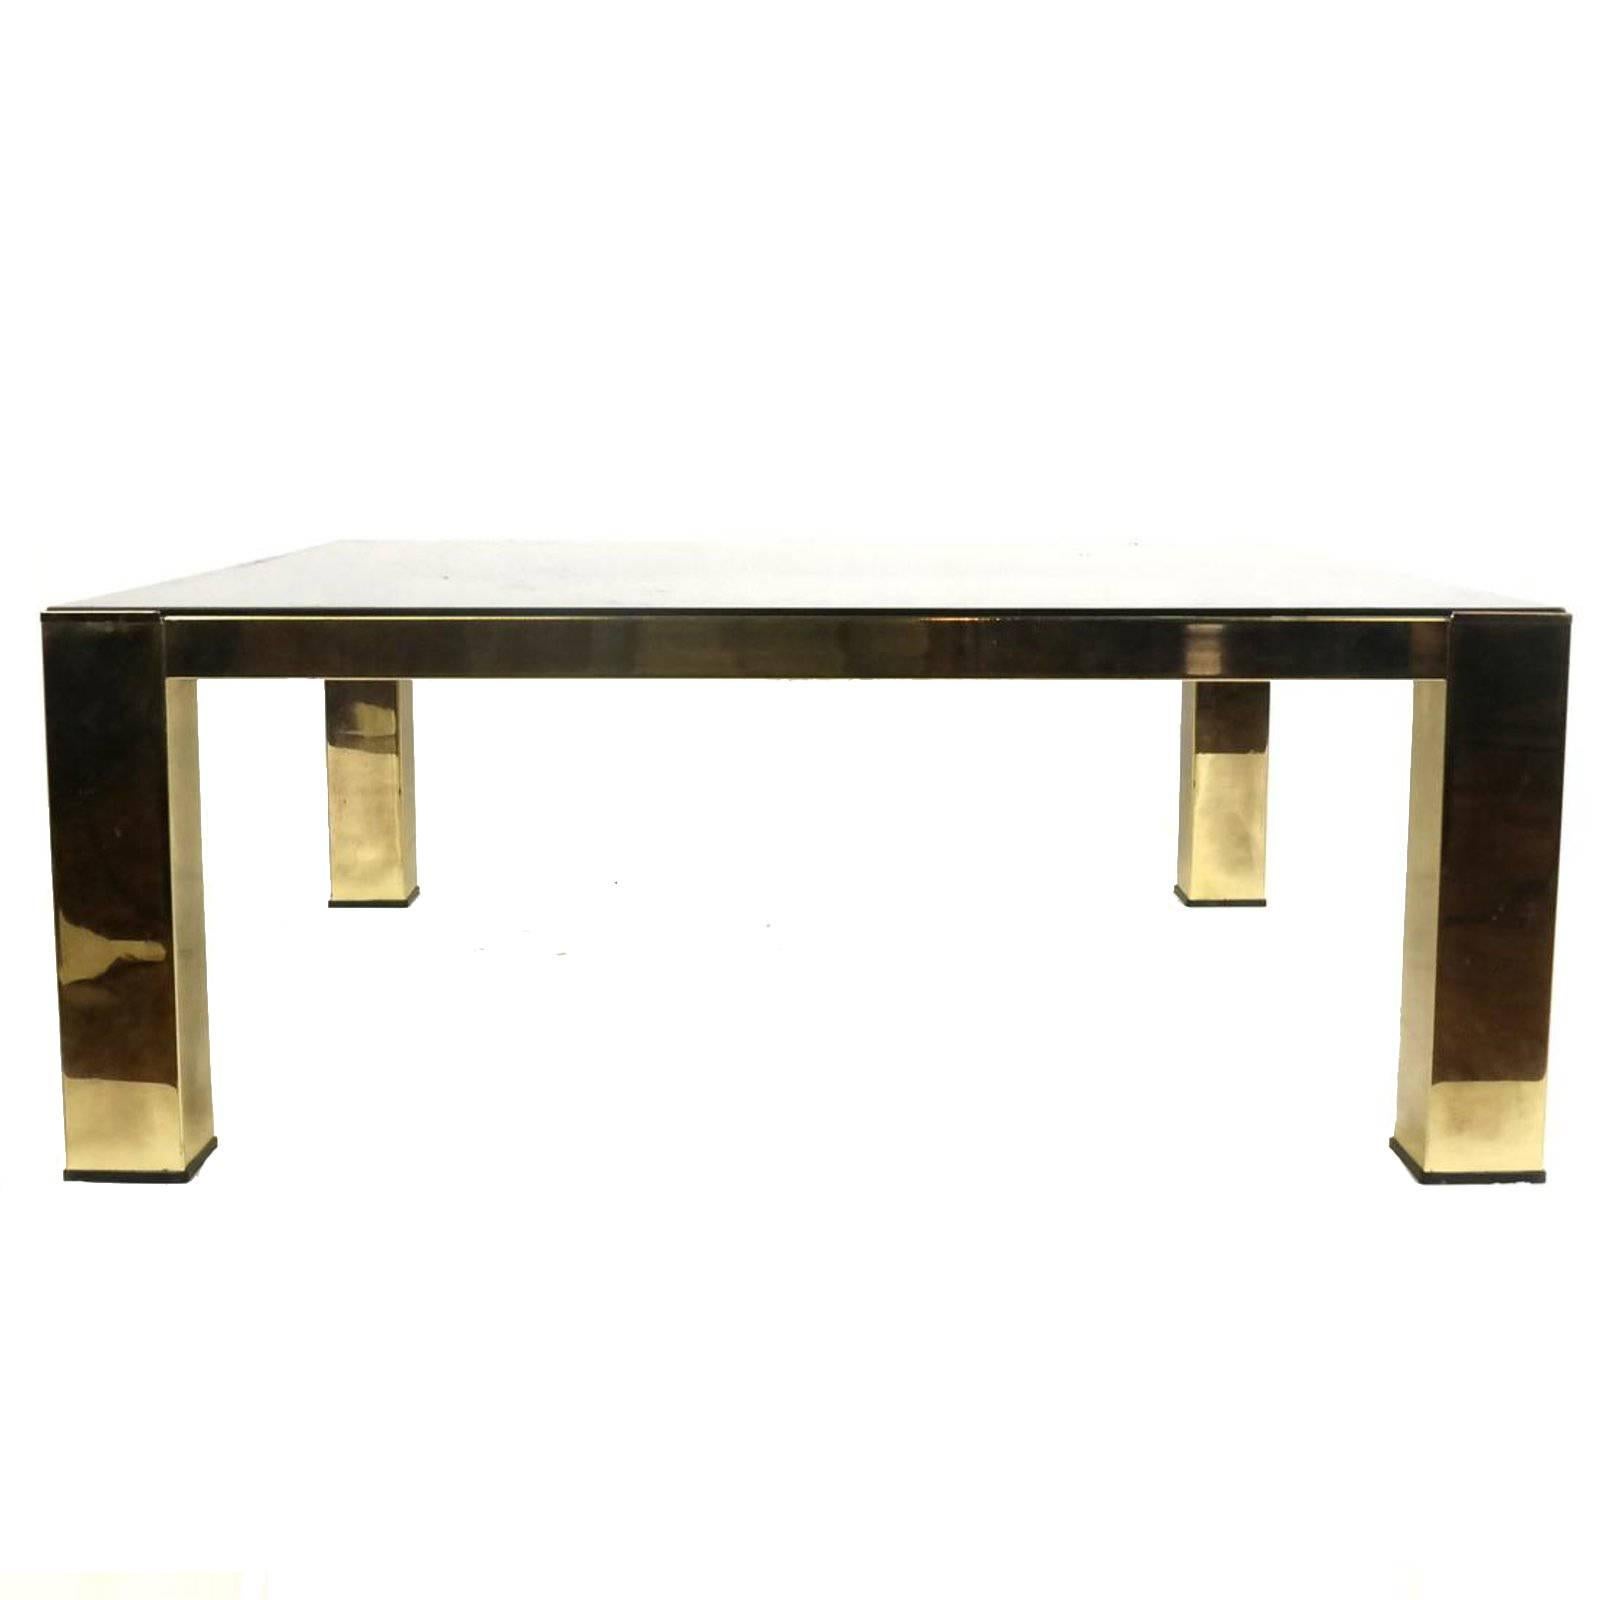 Mastercraft style brass and glass cocktail table.